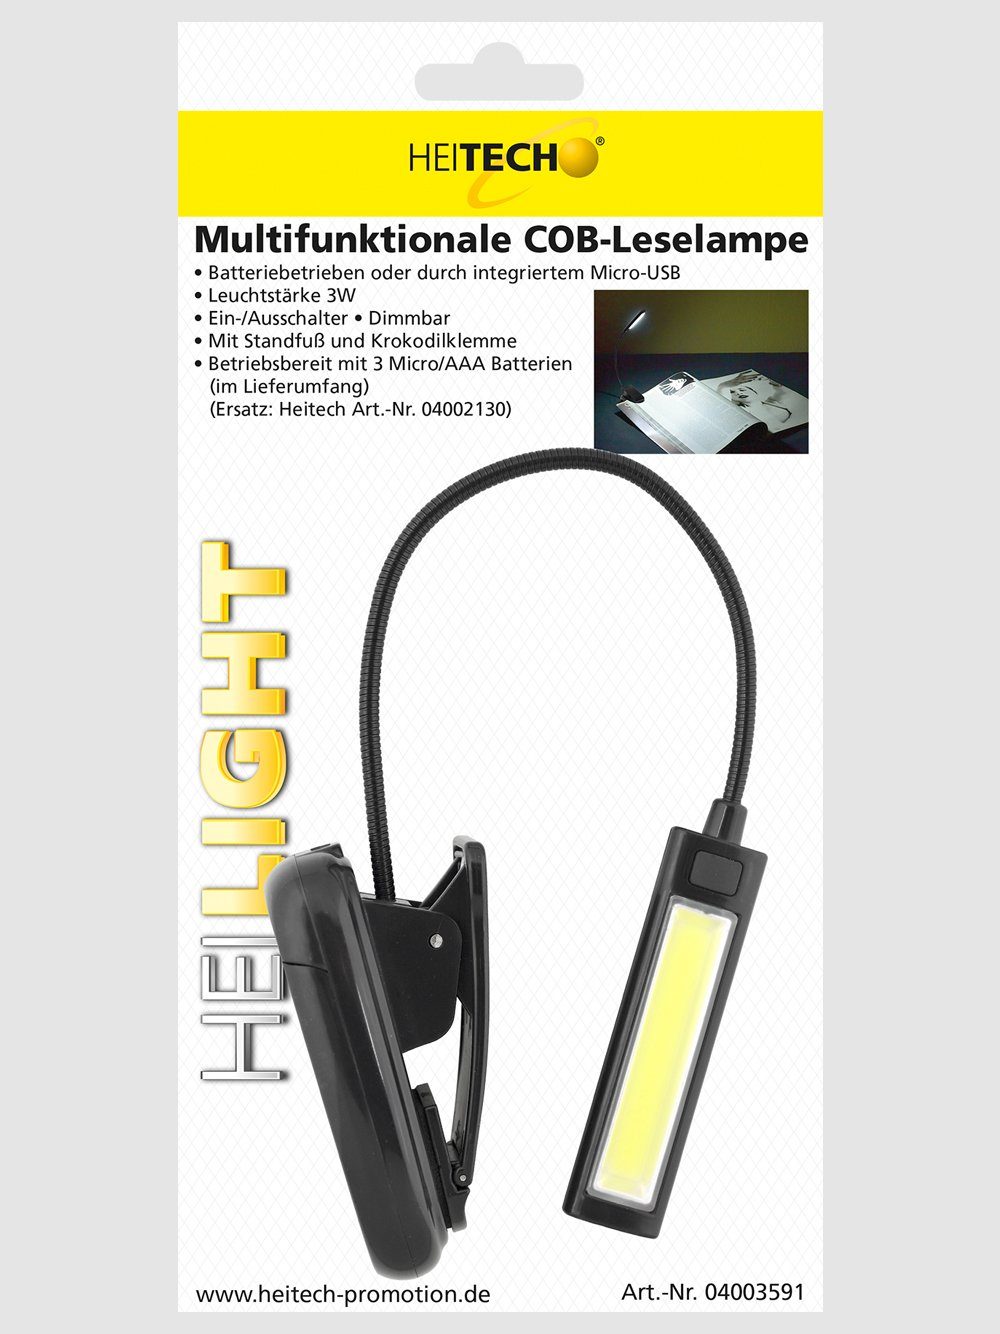 Multifunktionale COB-Leselampe LED HEITECH Leselampe Mit Standfuß